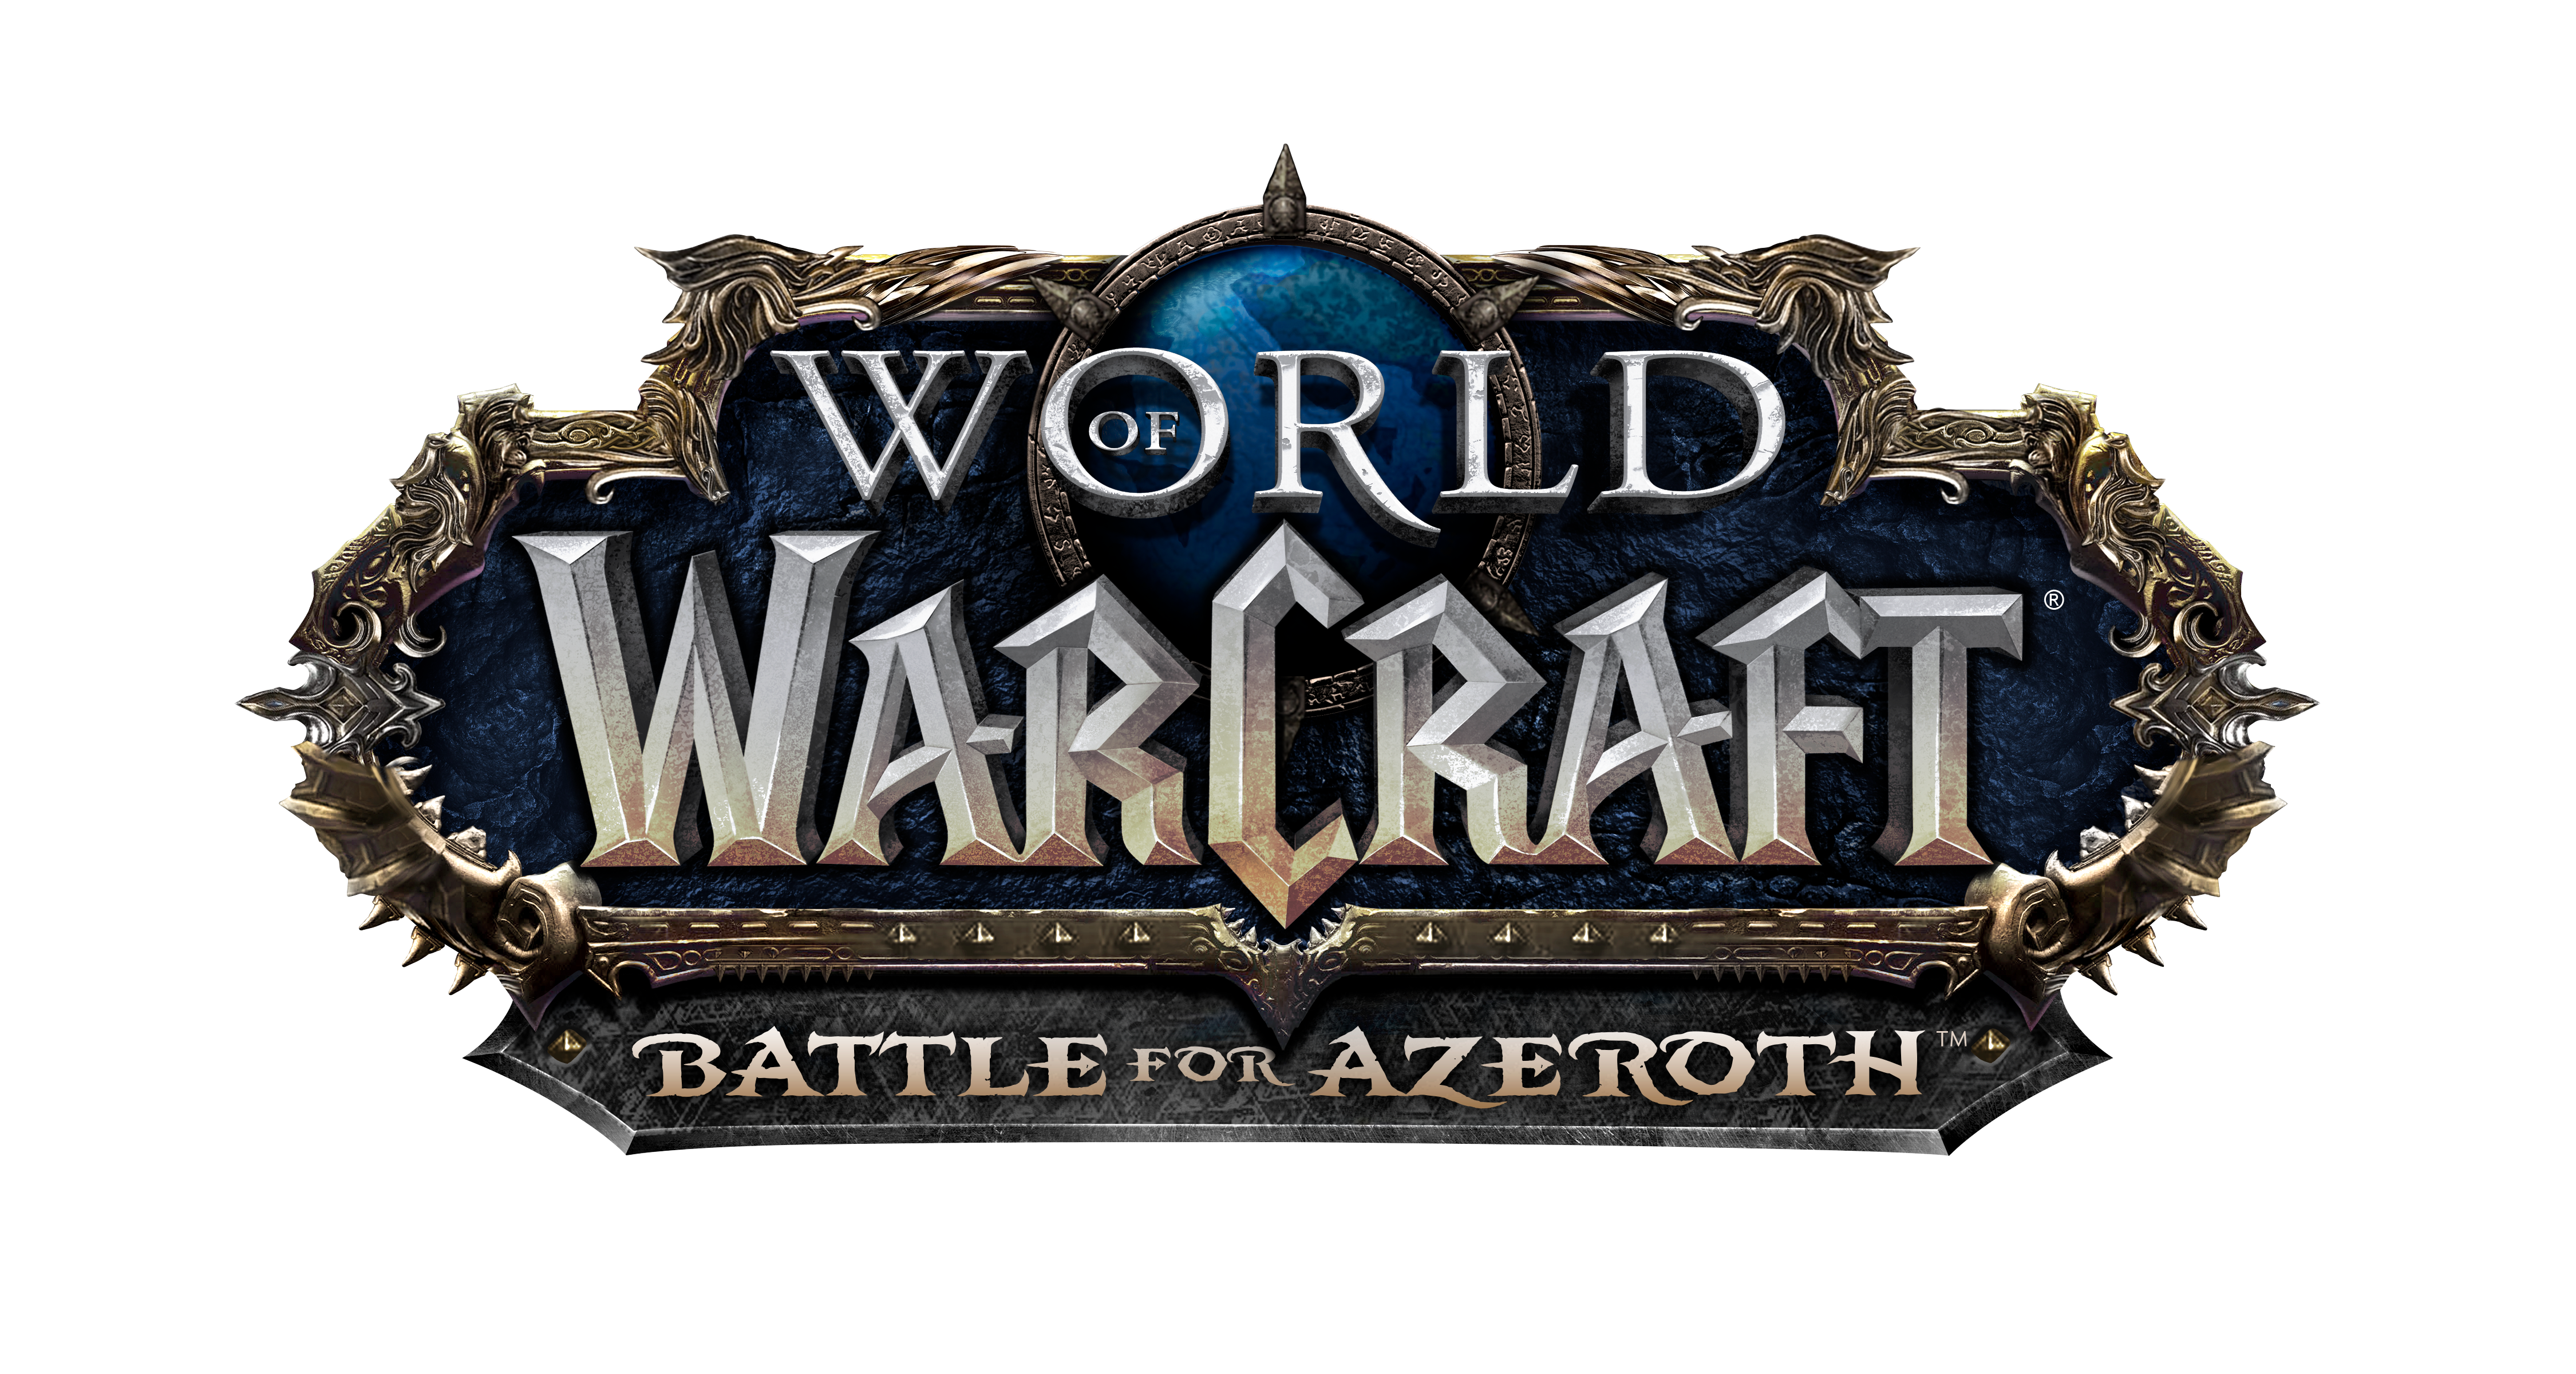 General 4500x2400 World of Warcraft World of Warcraft: Battle for Azeroth PC gaming video games